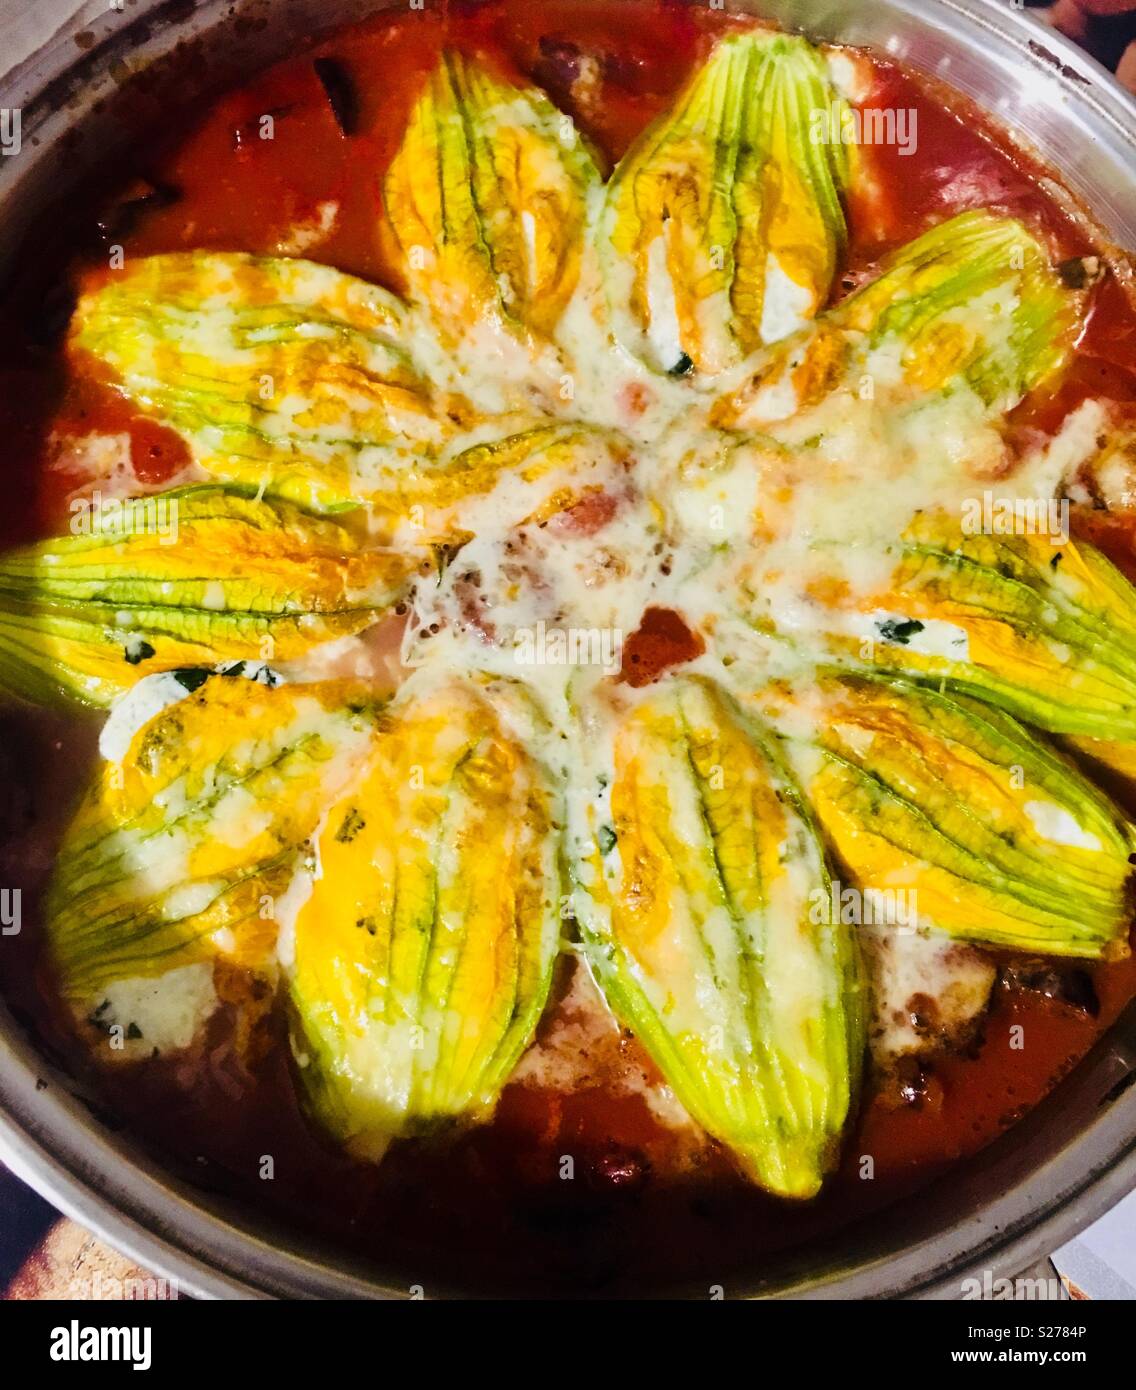 Traditional Roman cuisine.Zucchini flowers stuffed with mozzarella and Ricotta cheese cooked in tomato sauce. Stock Photo